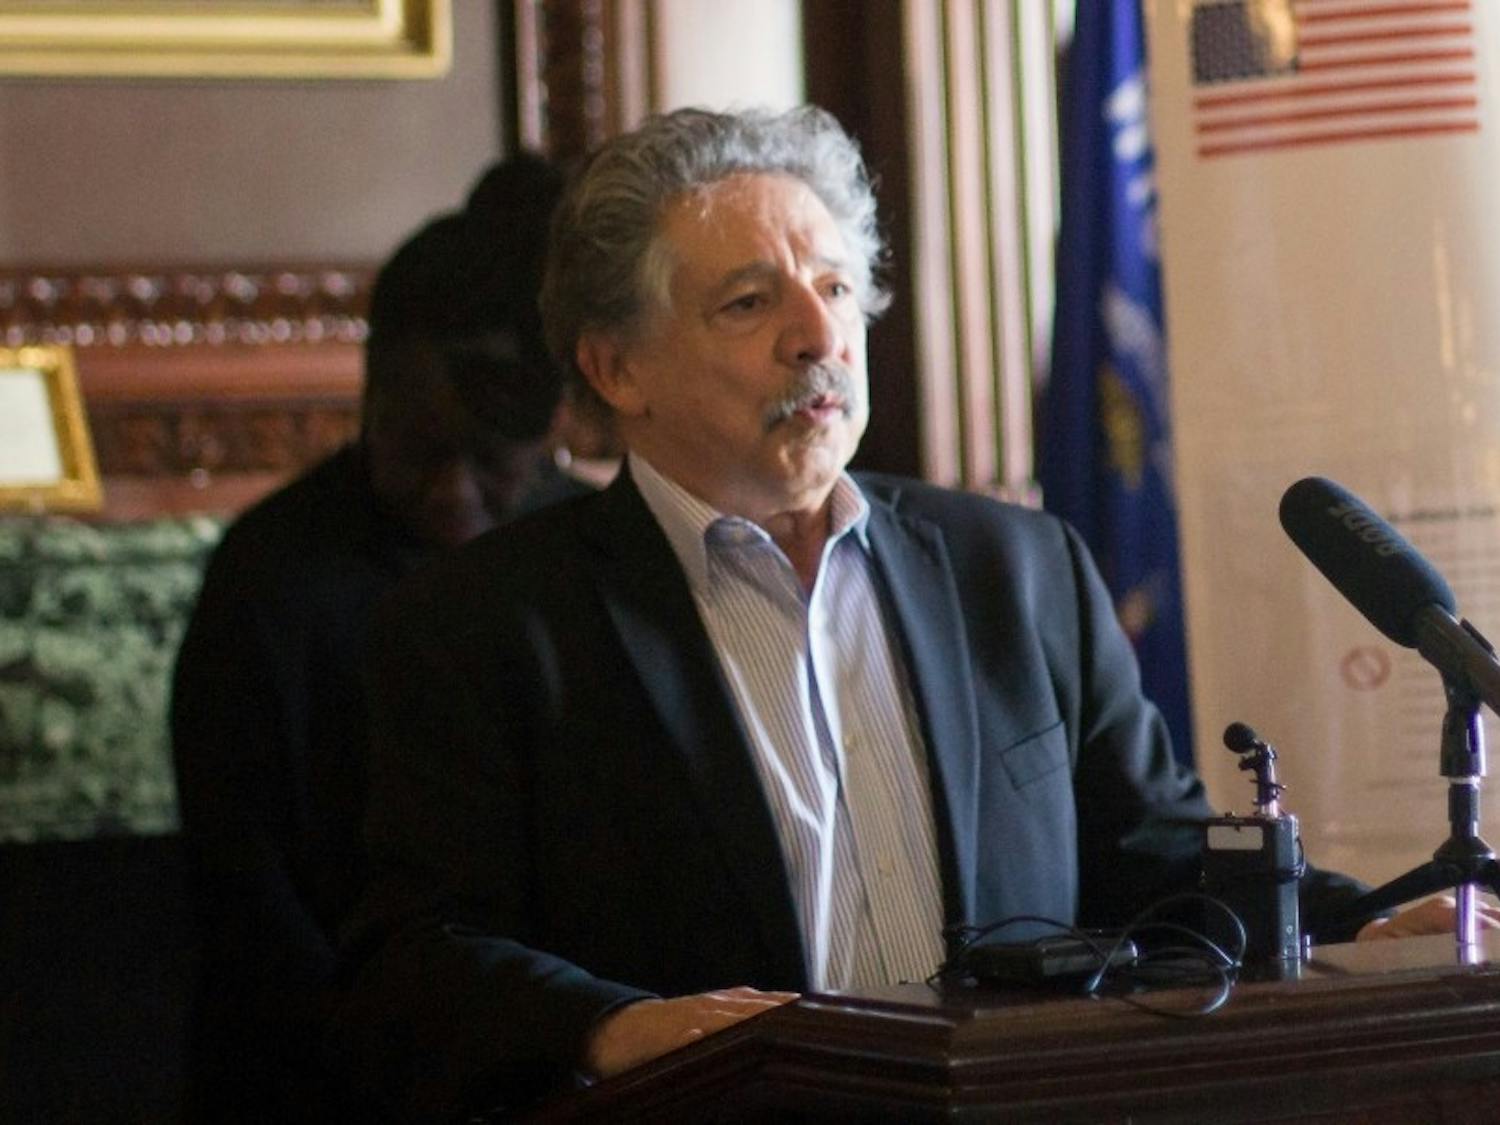 Madison Mayor Paul Soglin officially announced he will run for governor in 2018.&nbsp;